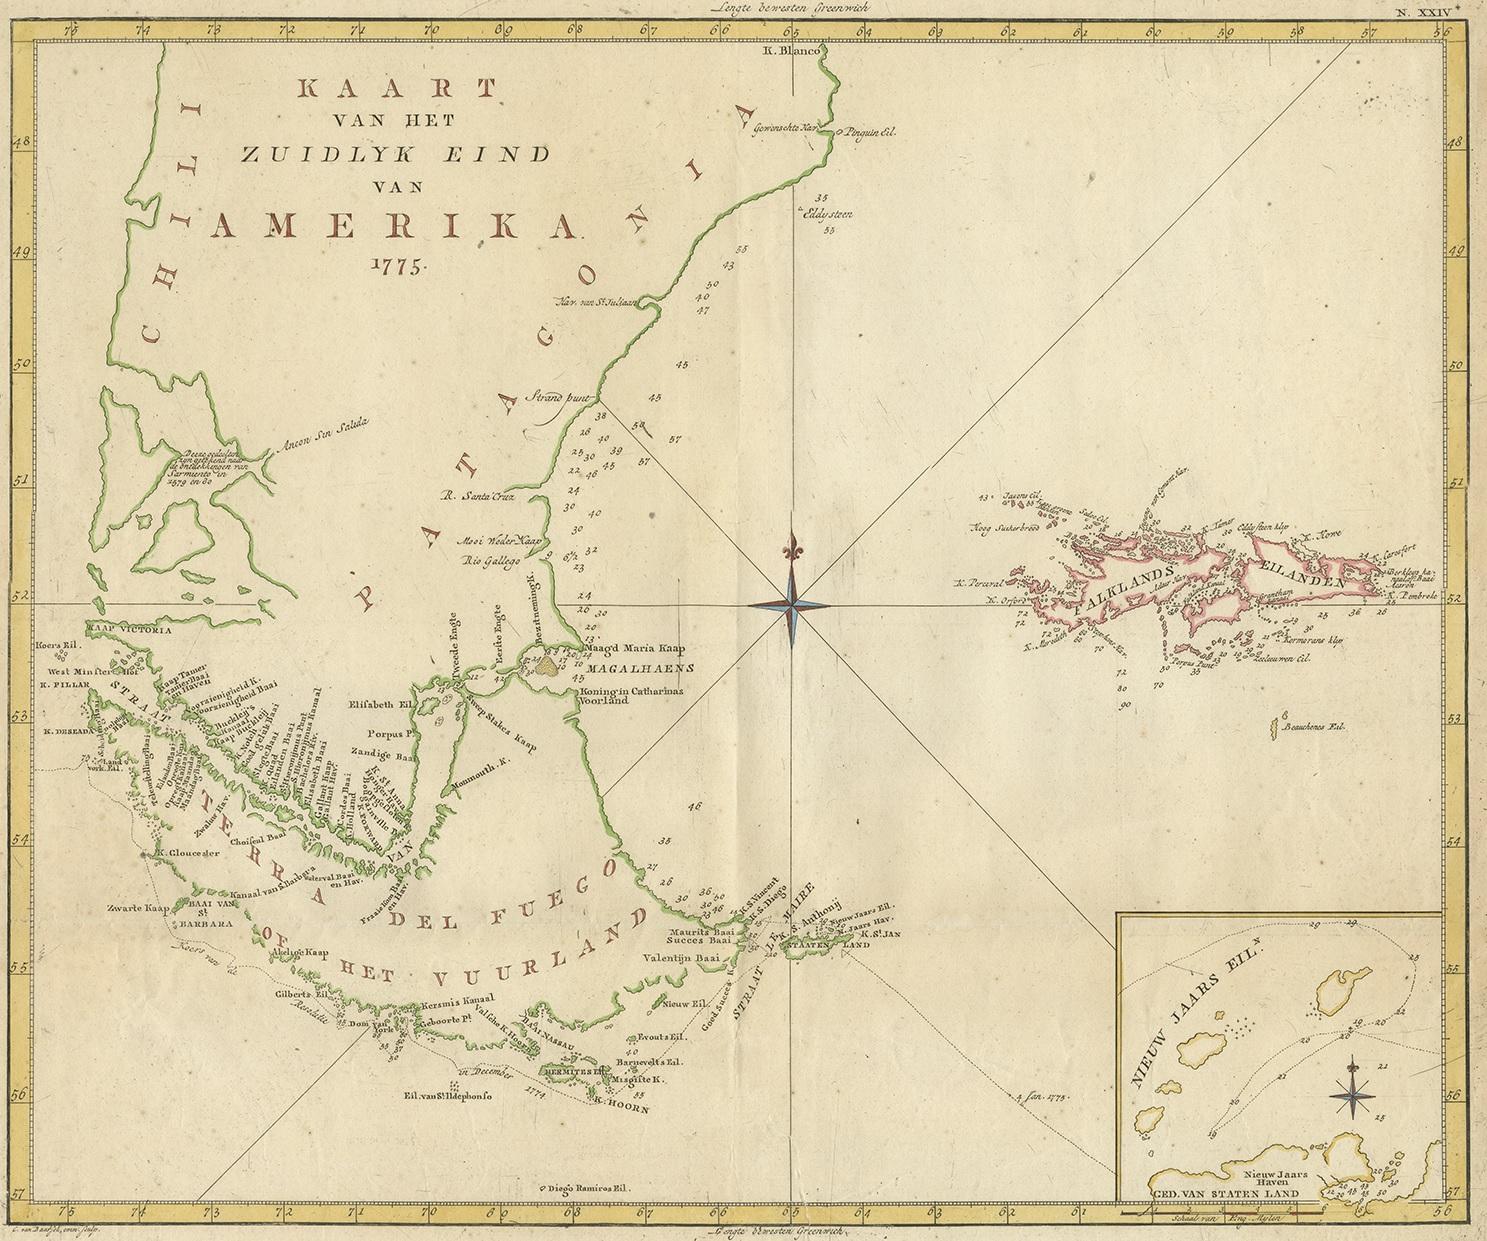 Antique map titled 'Kaart van het Zuidlyk Eind van Amerika'. Map of the sourthern part of South America, focusing on Cook's tracks around the Cape Horn and Tierra del Fuego in 1775. This map originates from a Dutch edition of the Official Account of